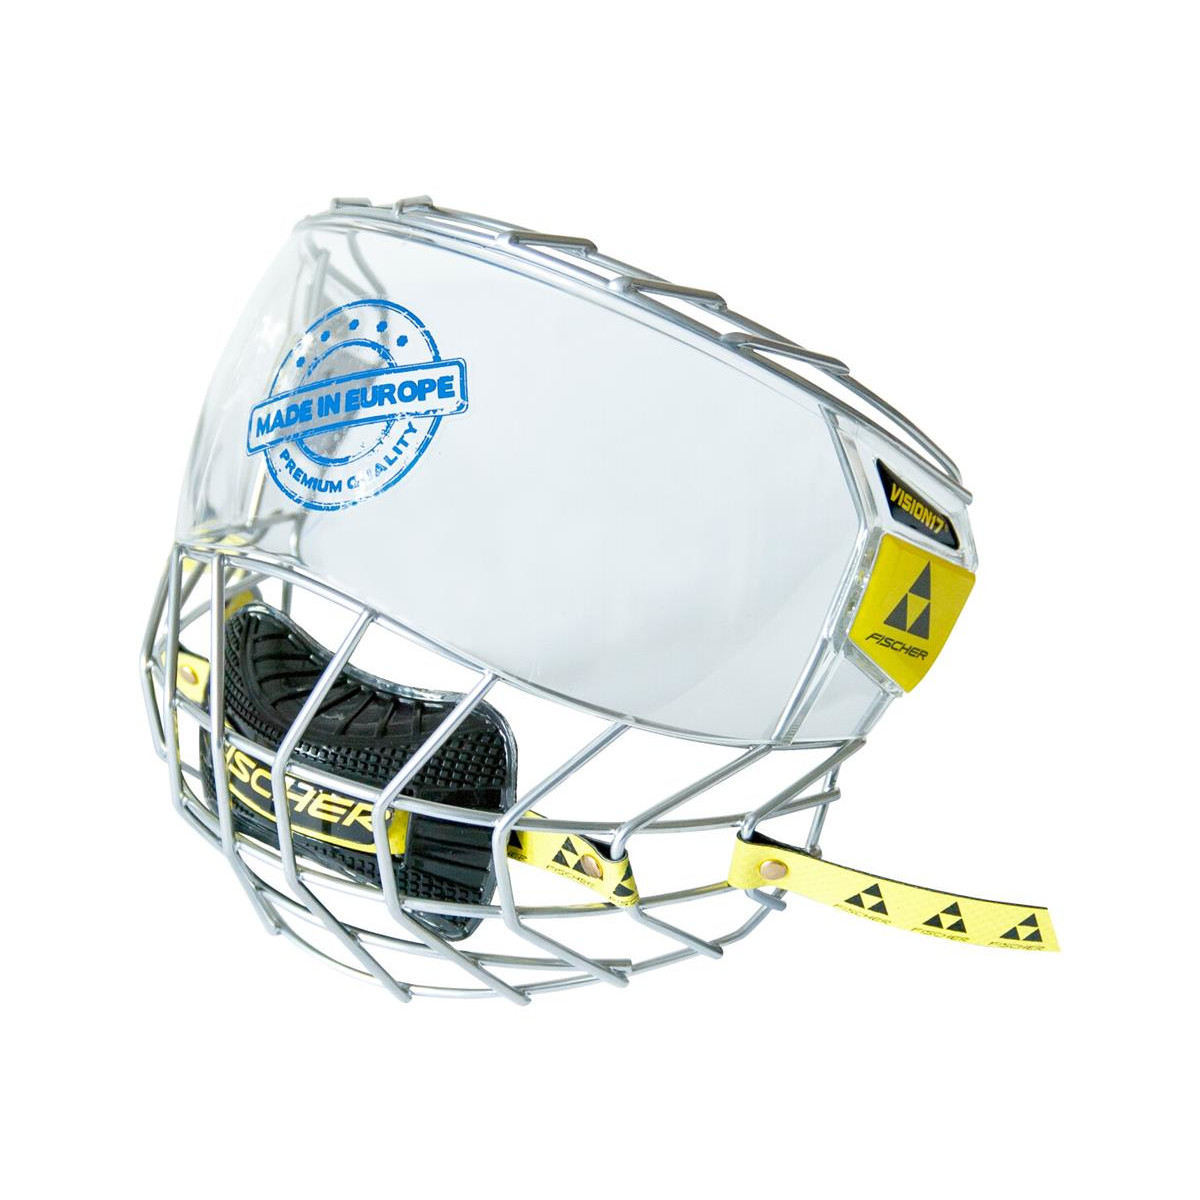 Fischer CONVEX 17 COMBO VISOR/CAGE WITH BOX